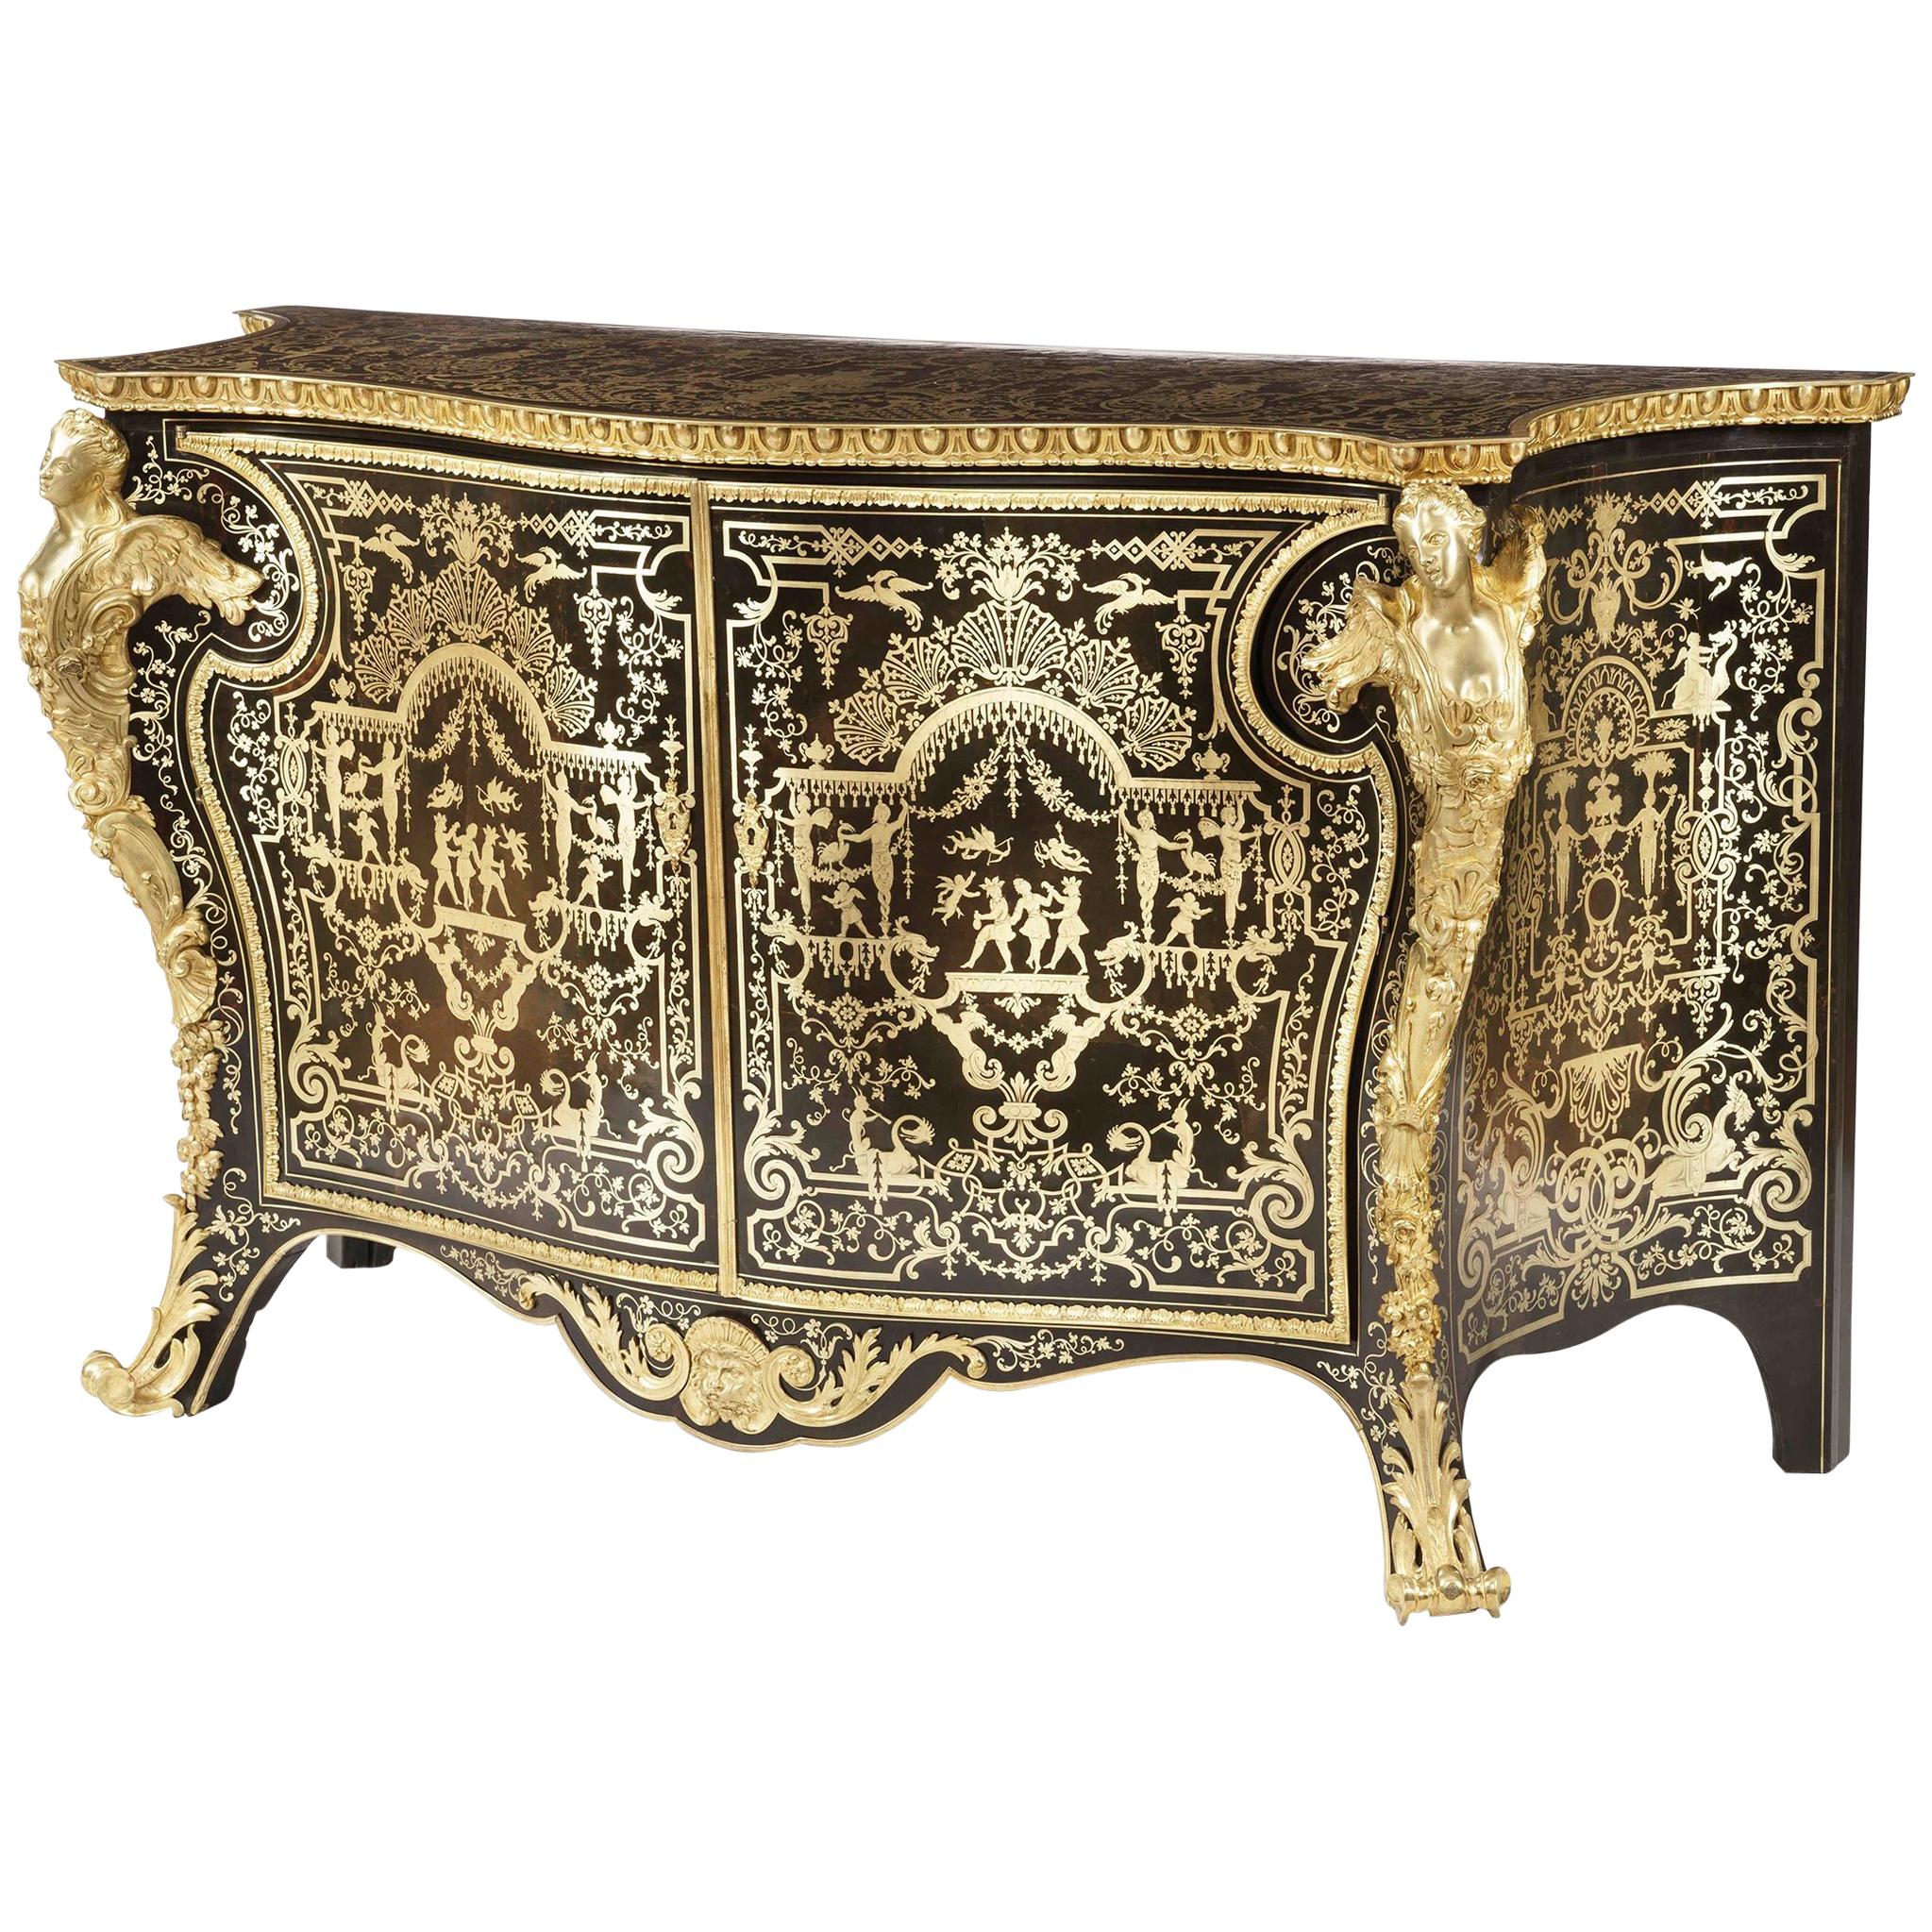 19th Century Ormolu-Mounted Boulle Commode in the Louis XIV Manner